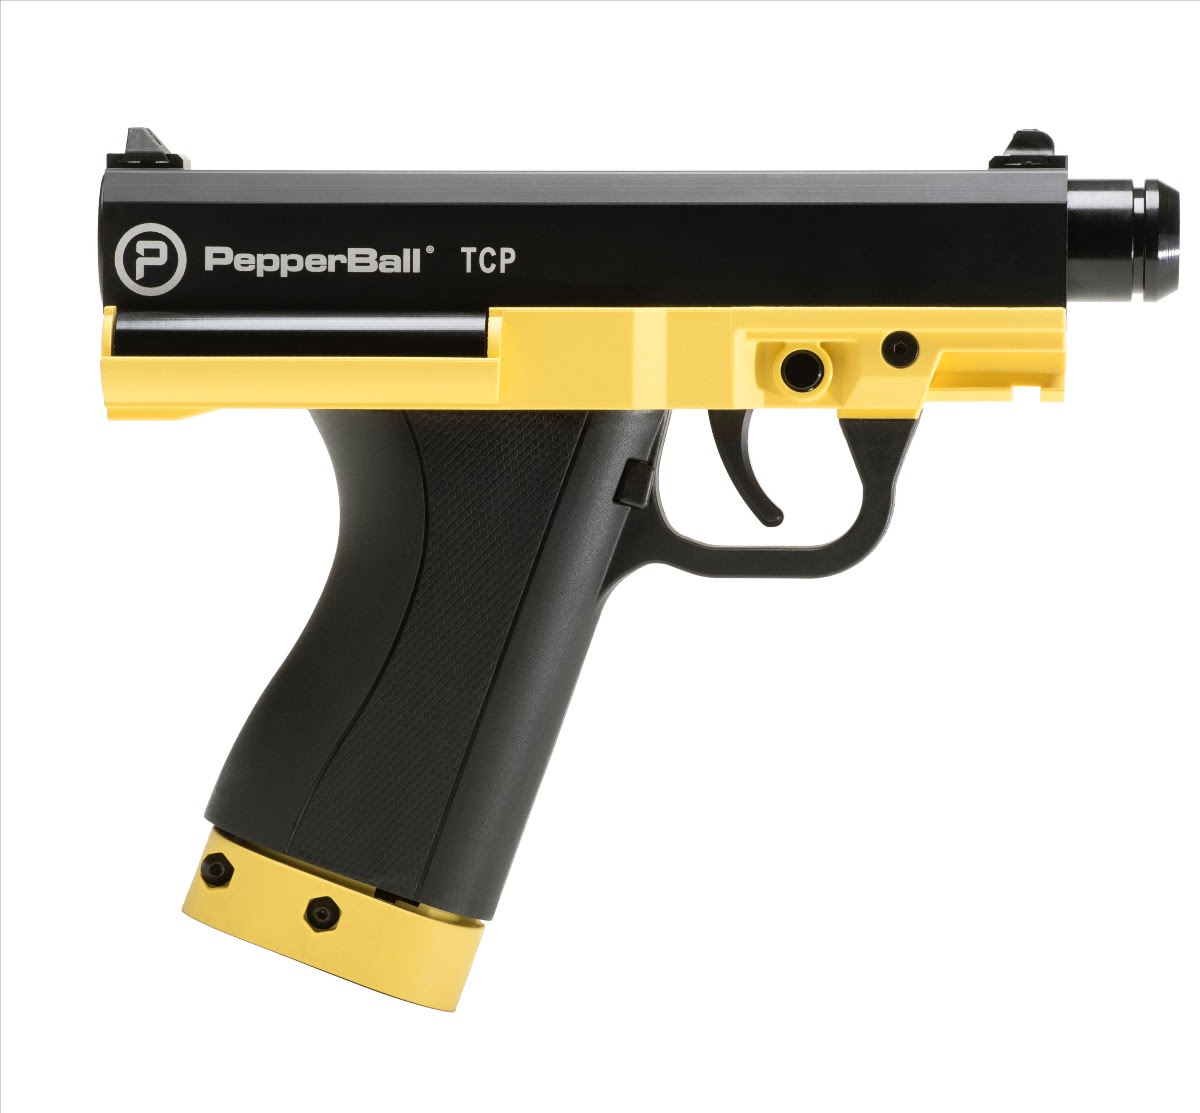 PEPPERBALL’S TCP COMPACT LAUNCHER NOW AVAILABLE TO CONSUMERS